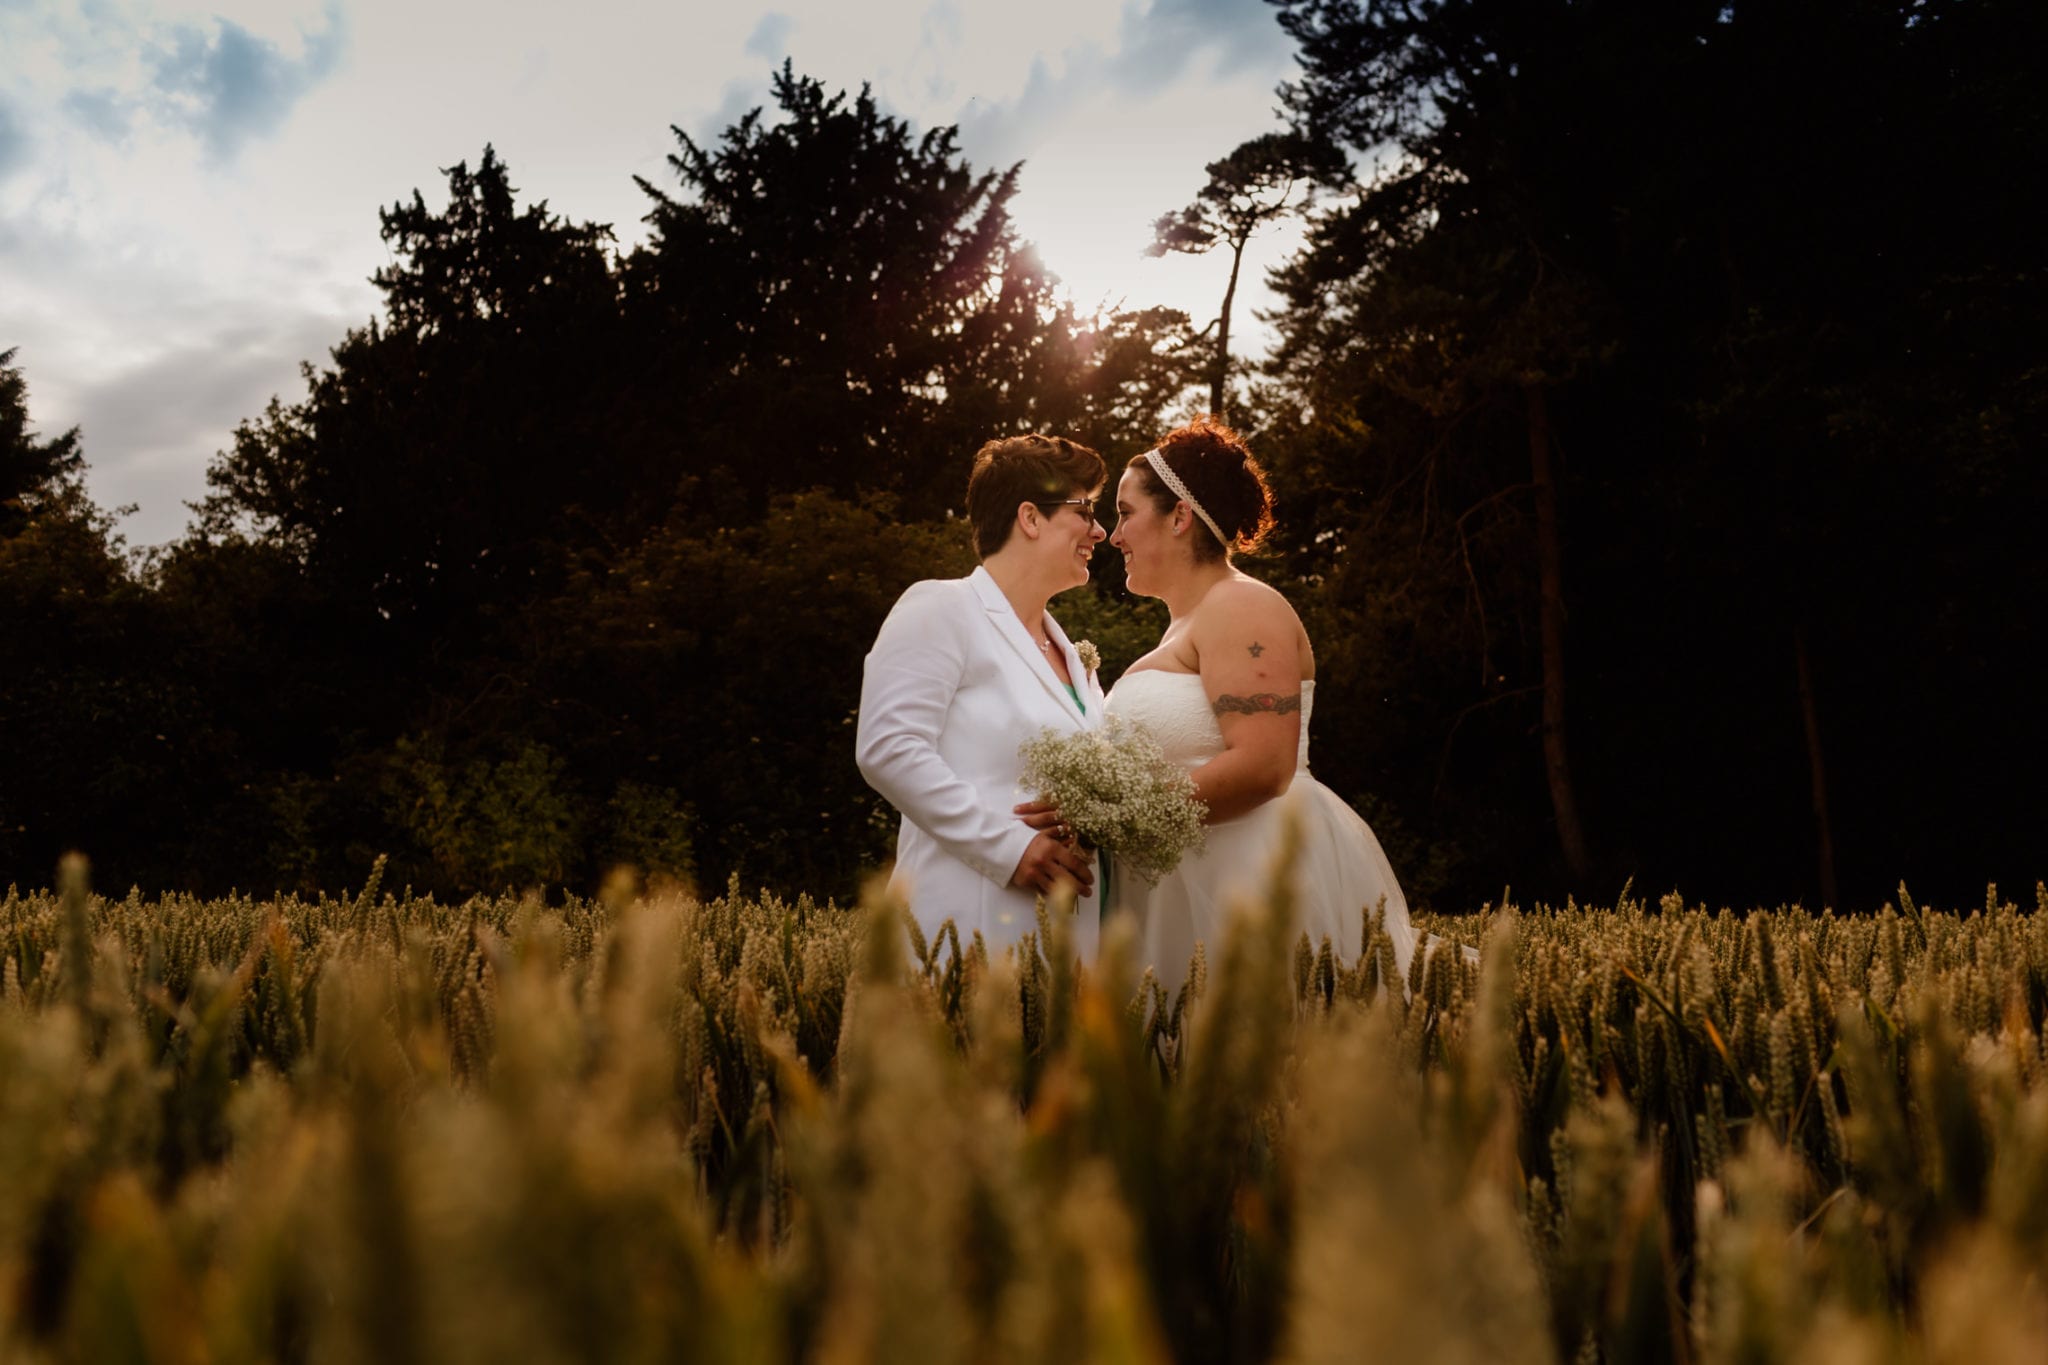 Two brides kissing on their wedding day in the sunlight